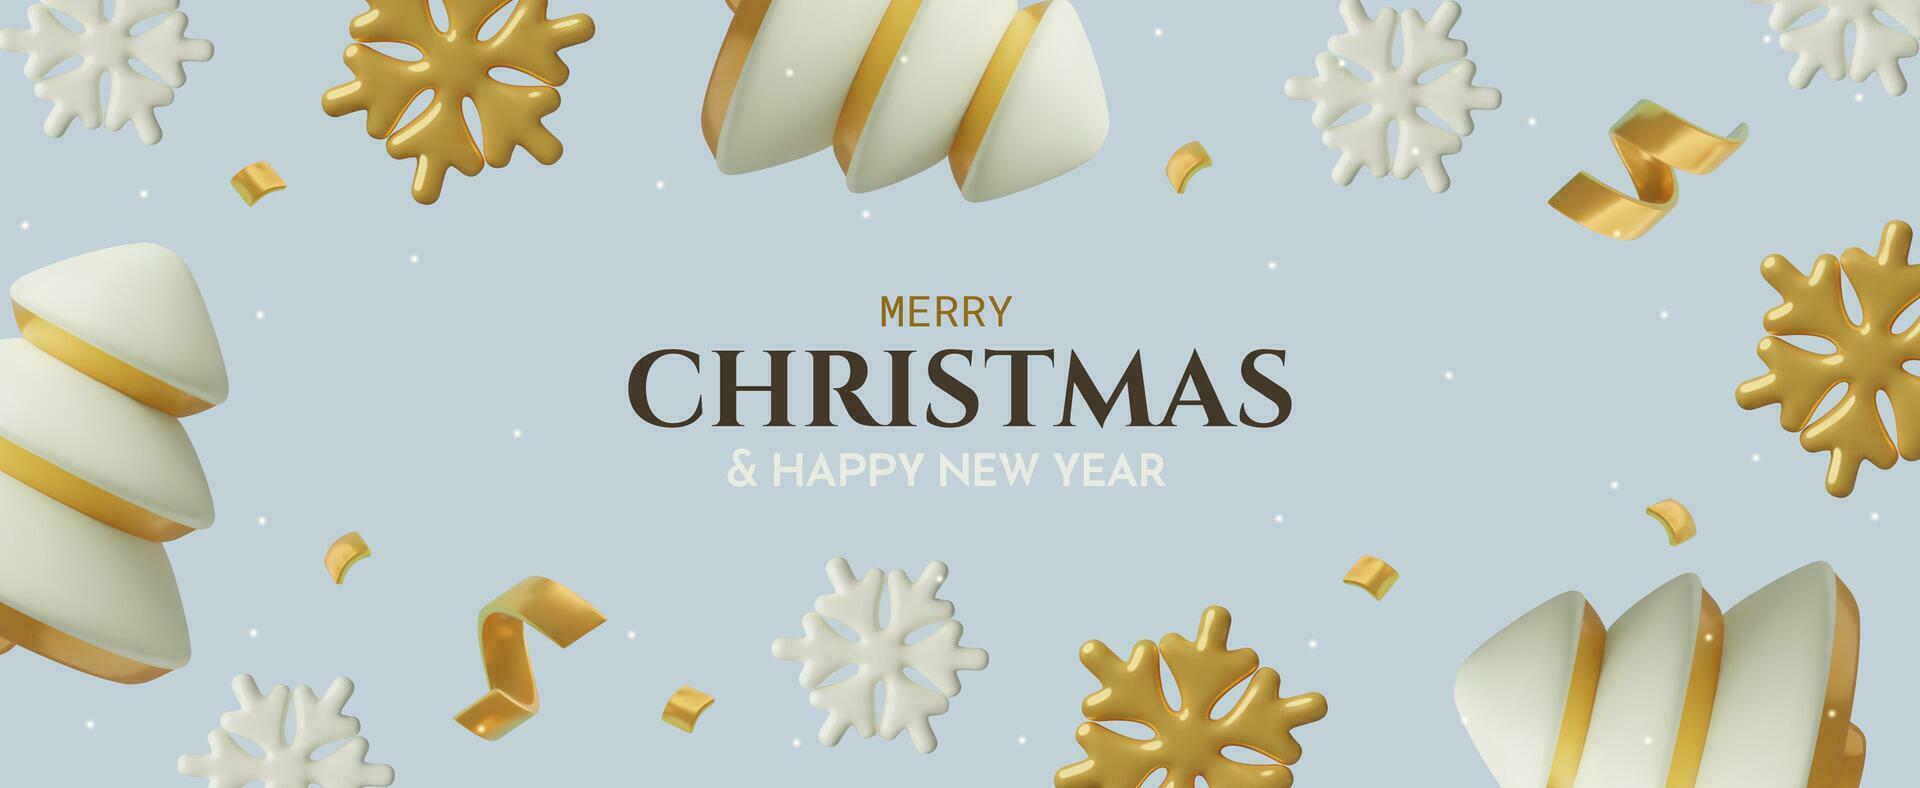 Christmas background with 3D realistic white winter pine trees, snowflakes and golden confetti vector